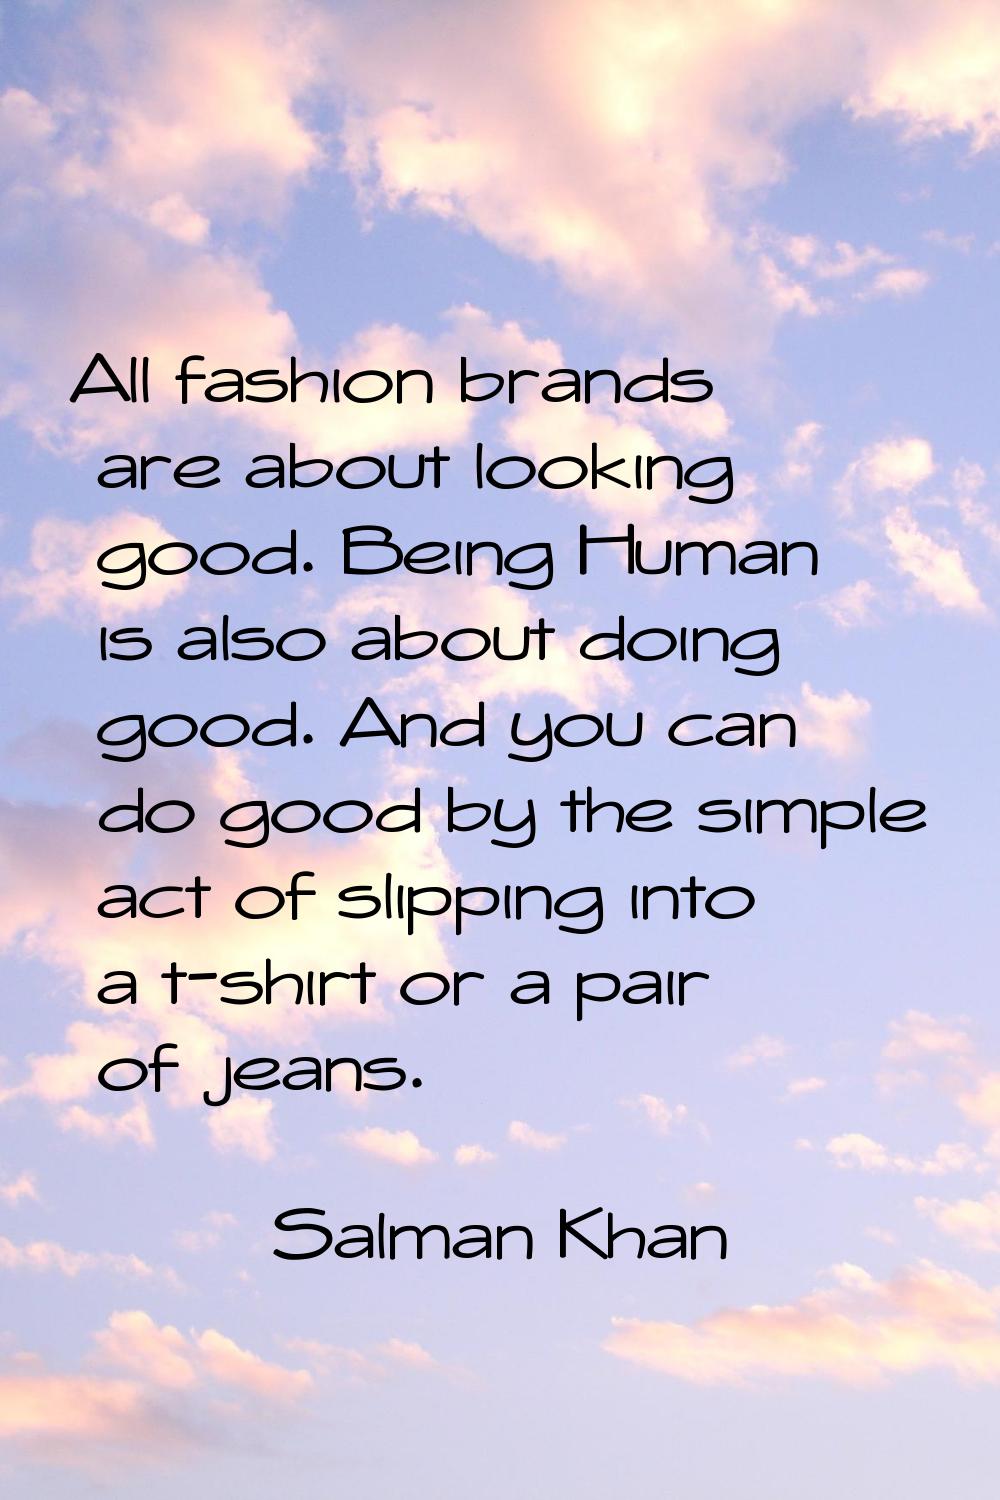 All fashion brands are about looking good. Being Human is also about doing good. And you can do goo